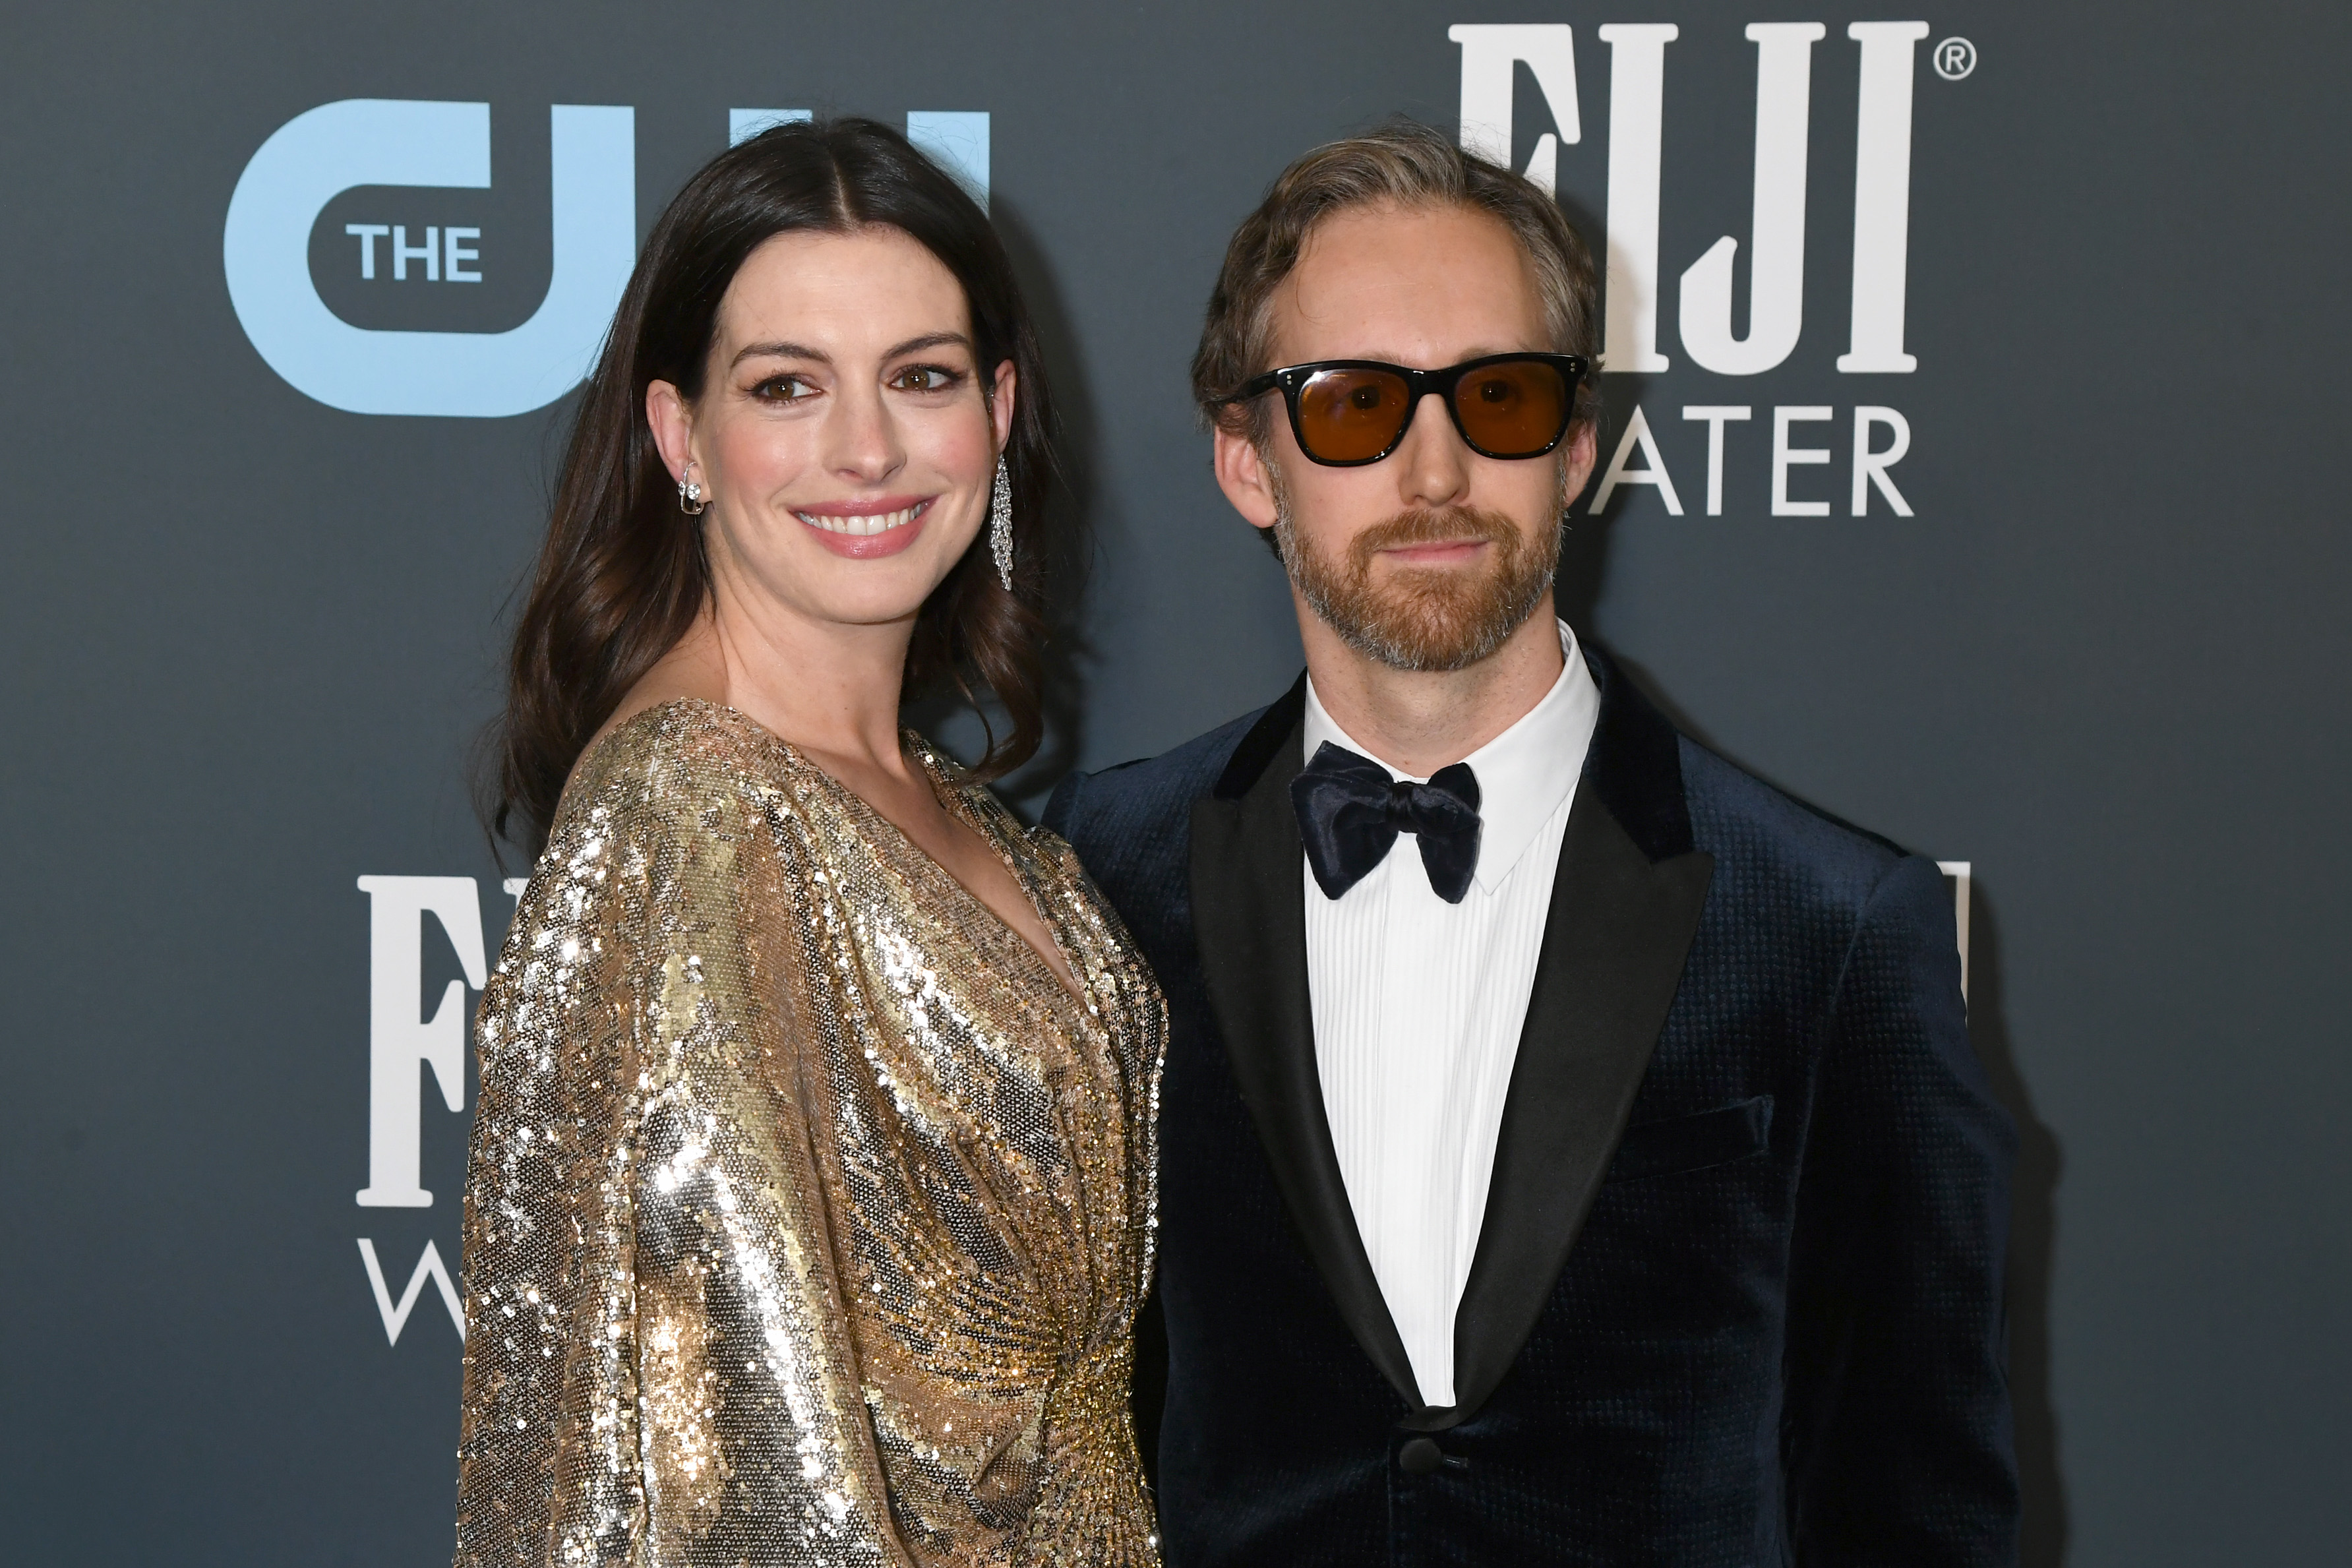 Anne posed with her husband Adam Shulman for a photo at an event in January 2020